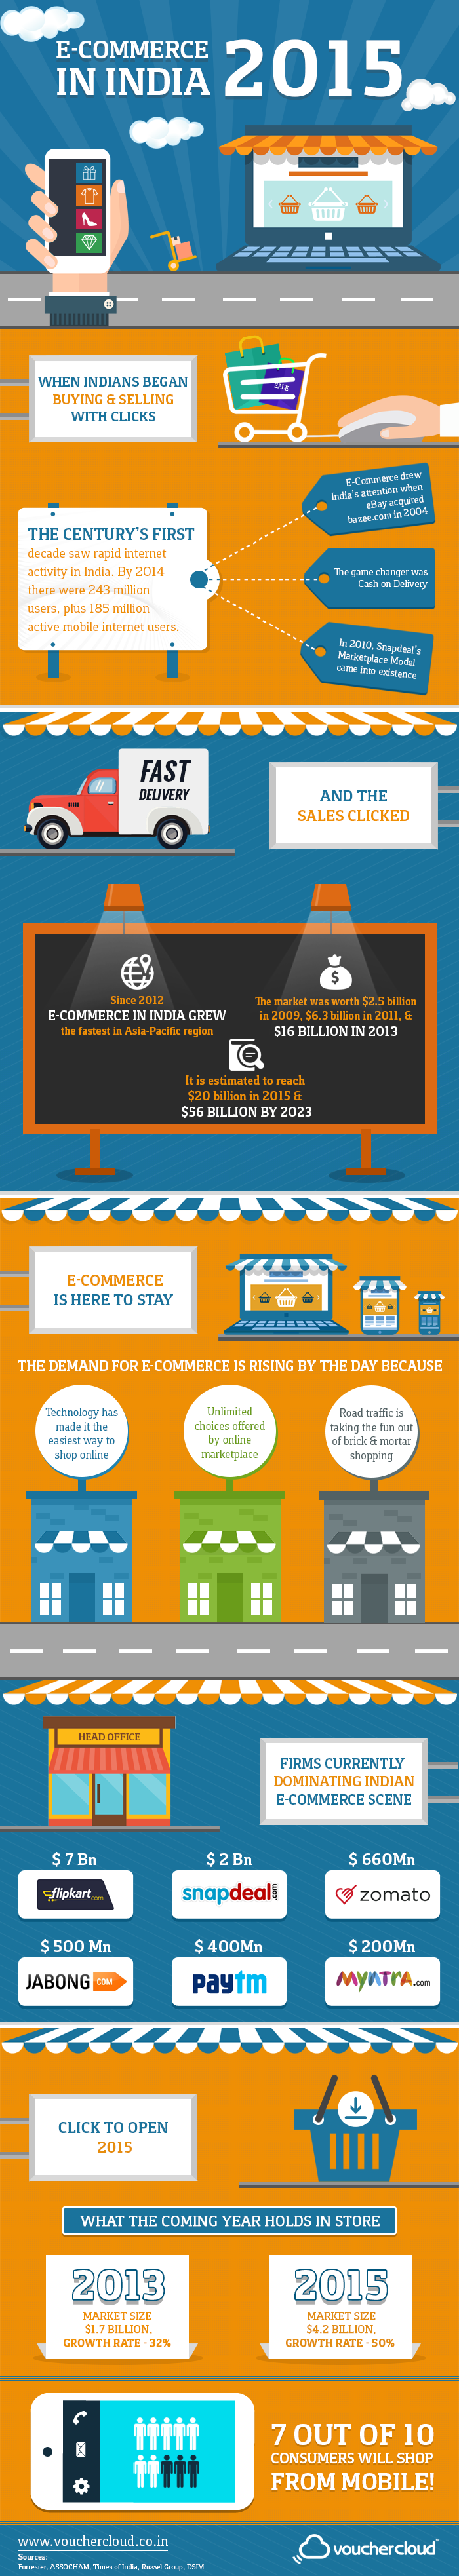 6 Must Read Facts of the Indian E-Commerce Growth 2015 – Voucher Cloud India